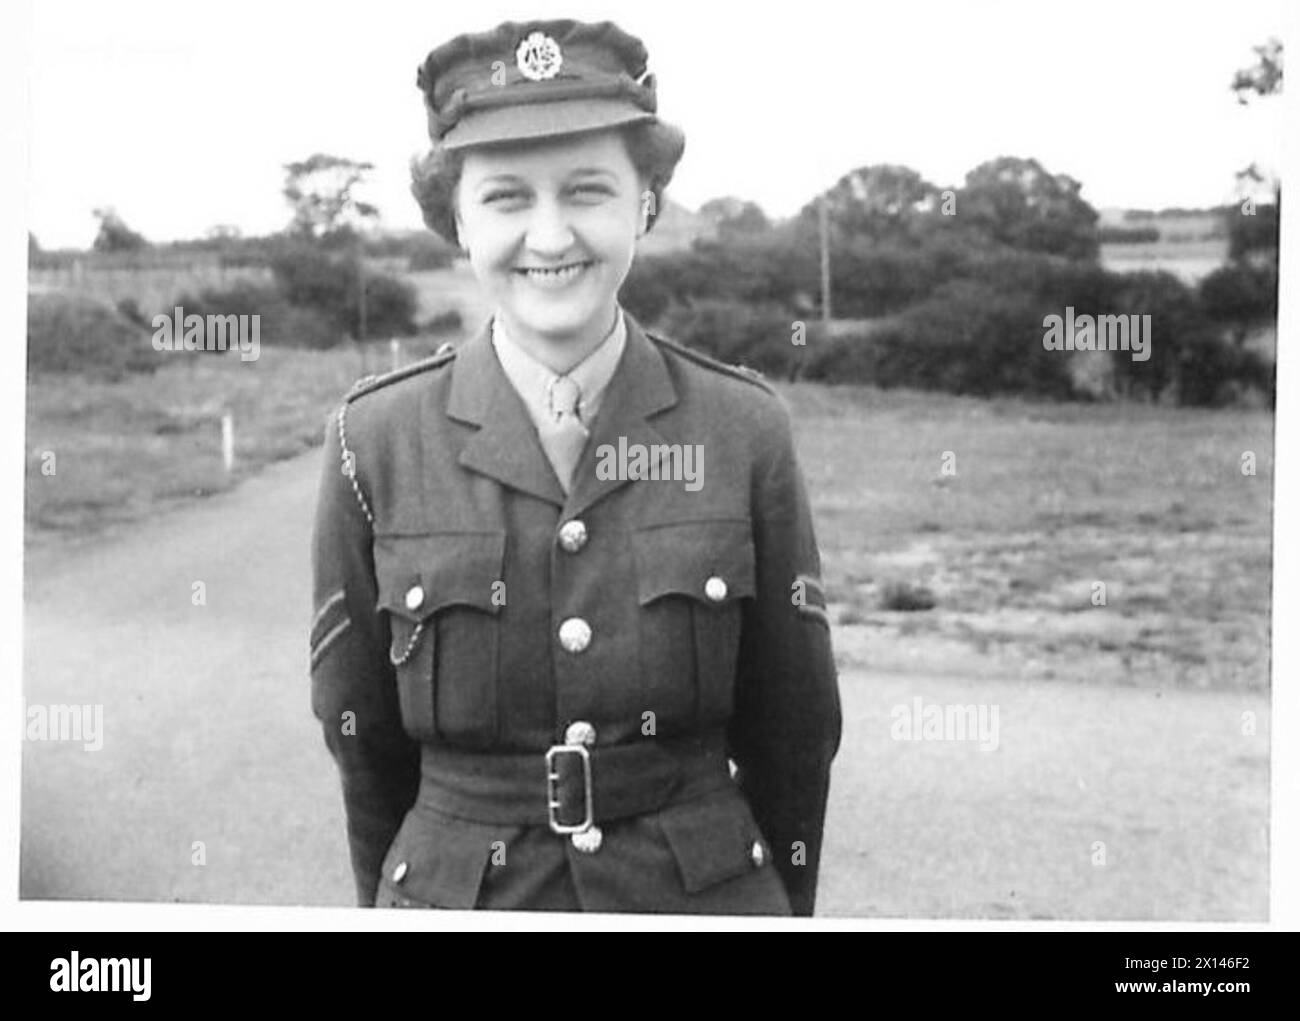 PORTRAITS OF ATS RECRUITING CORPORALS - Cpl. Winifred Gregg : Nottingham Recruiting office , British Army Stock Photo